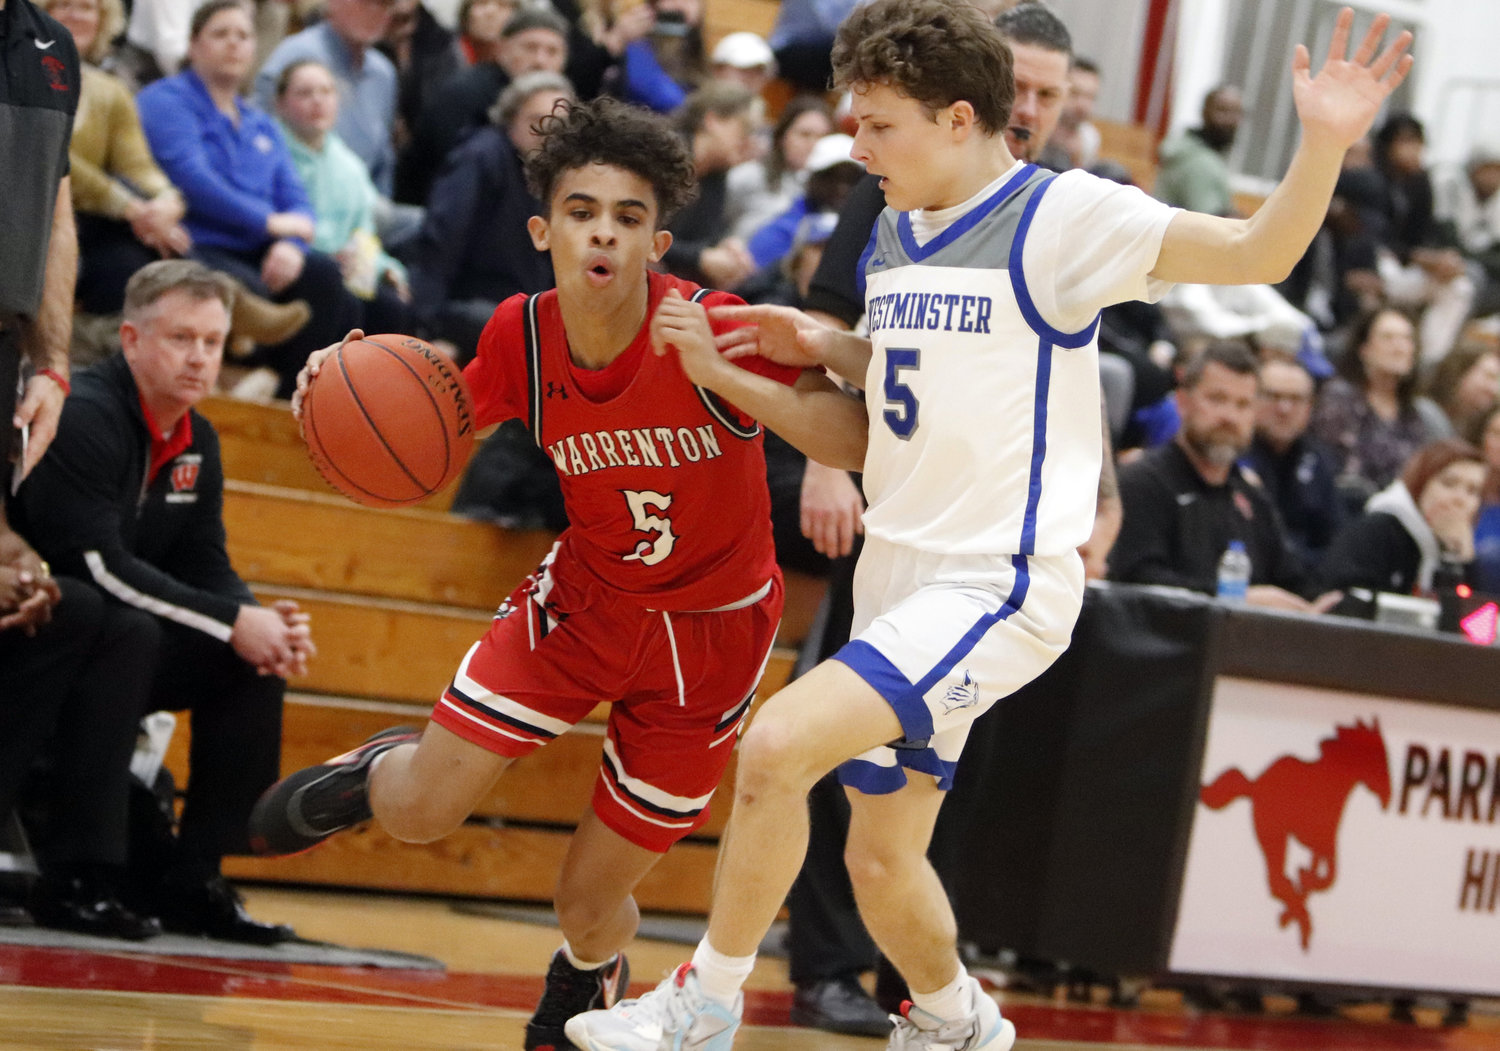 Warrenton freshman Deadrick Forrest (left) attempts to get past Westminster Christian’s Will Warren during last week’s district semifinal matchup at Parkway Central High School.